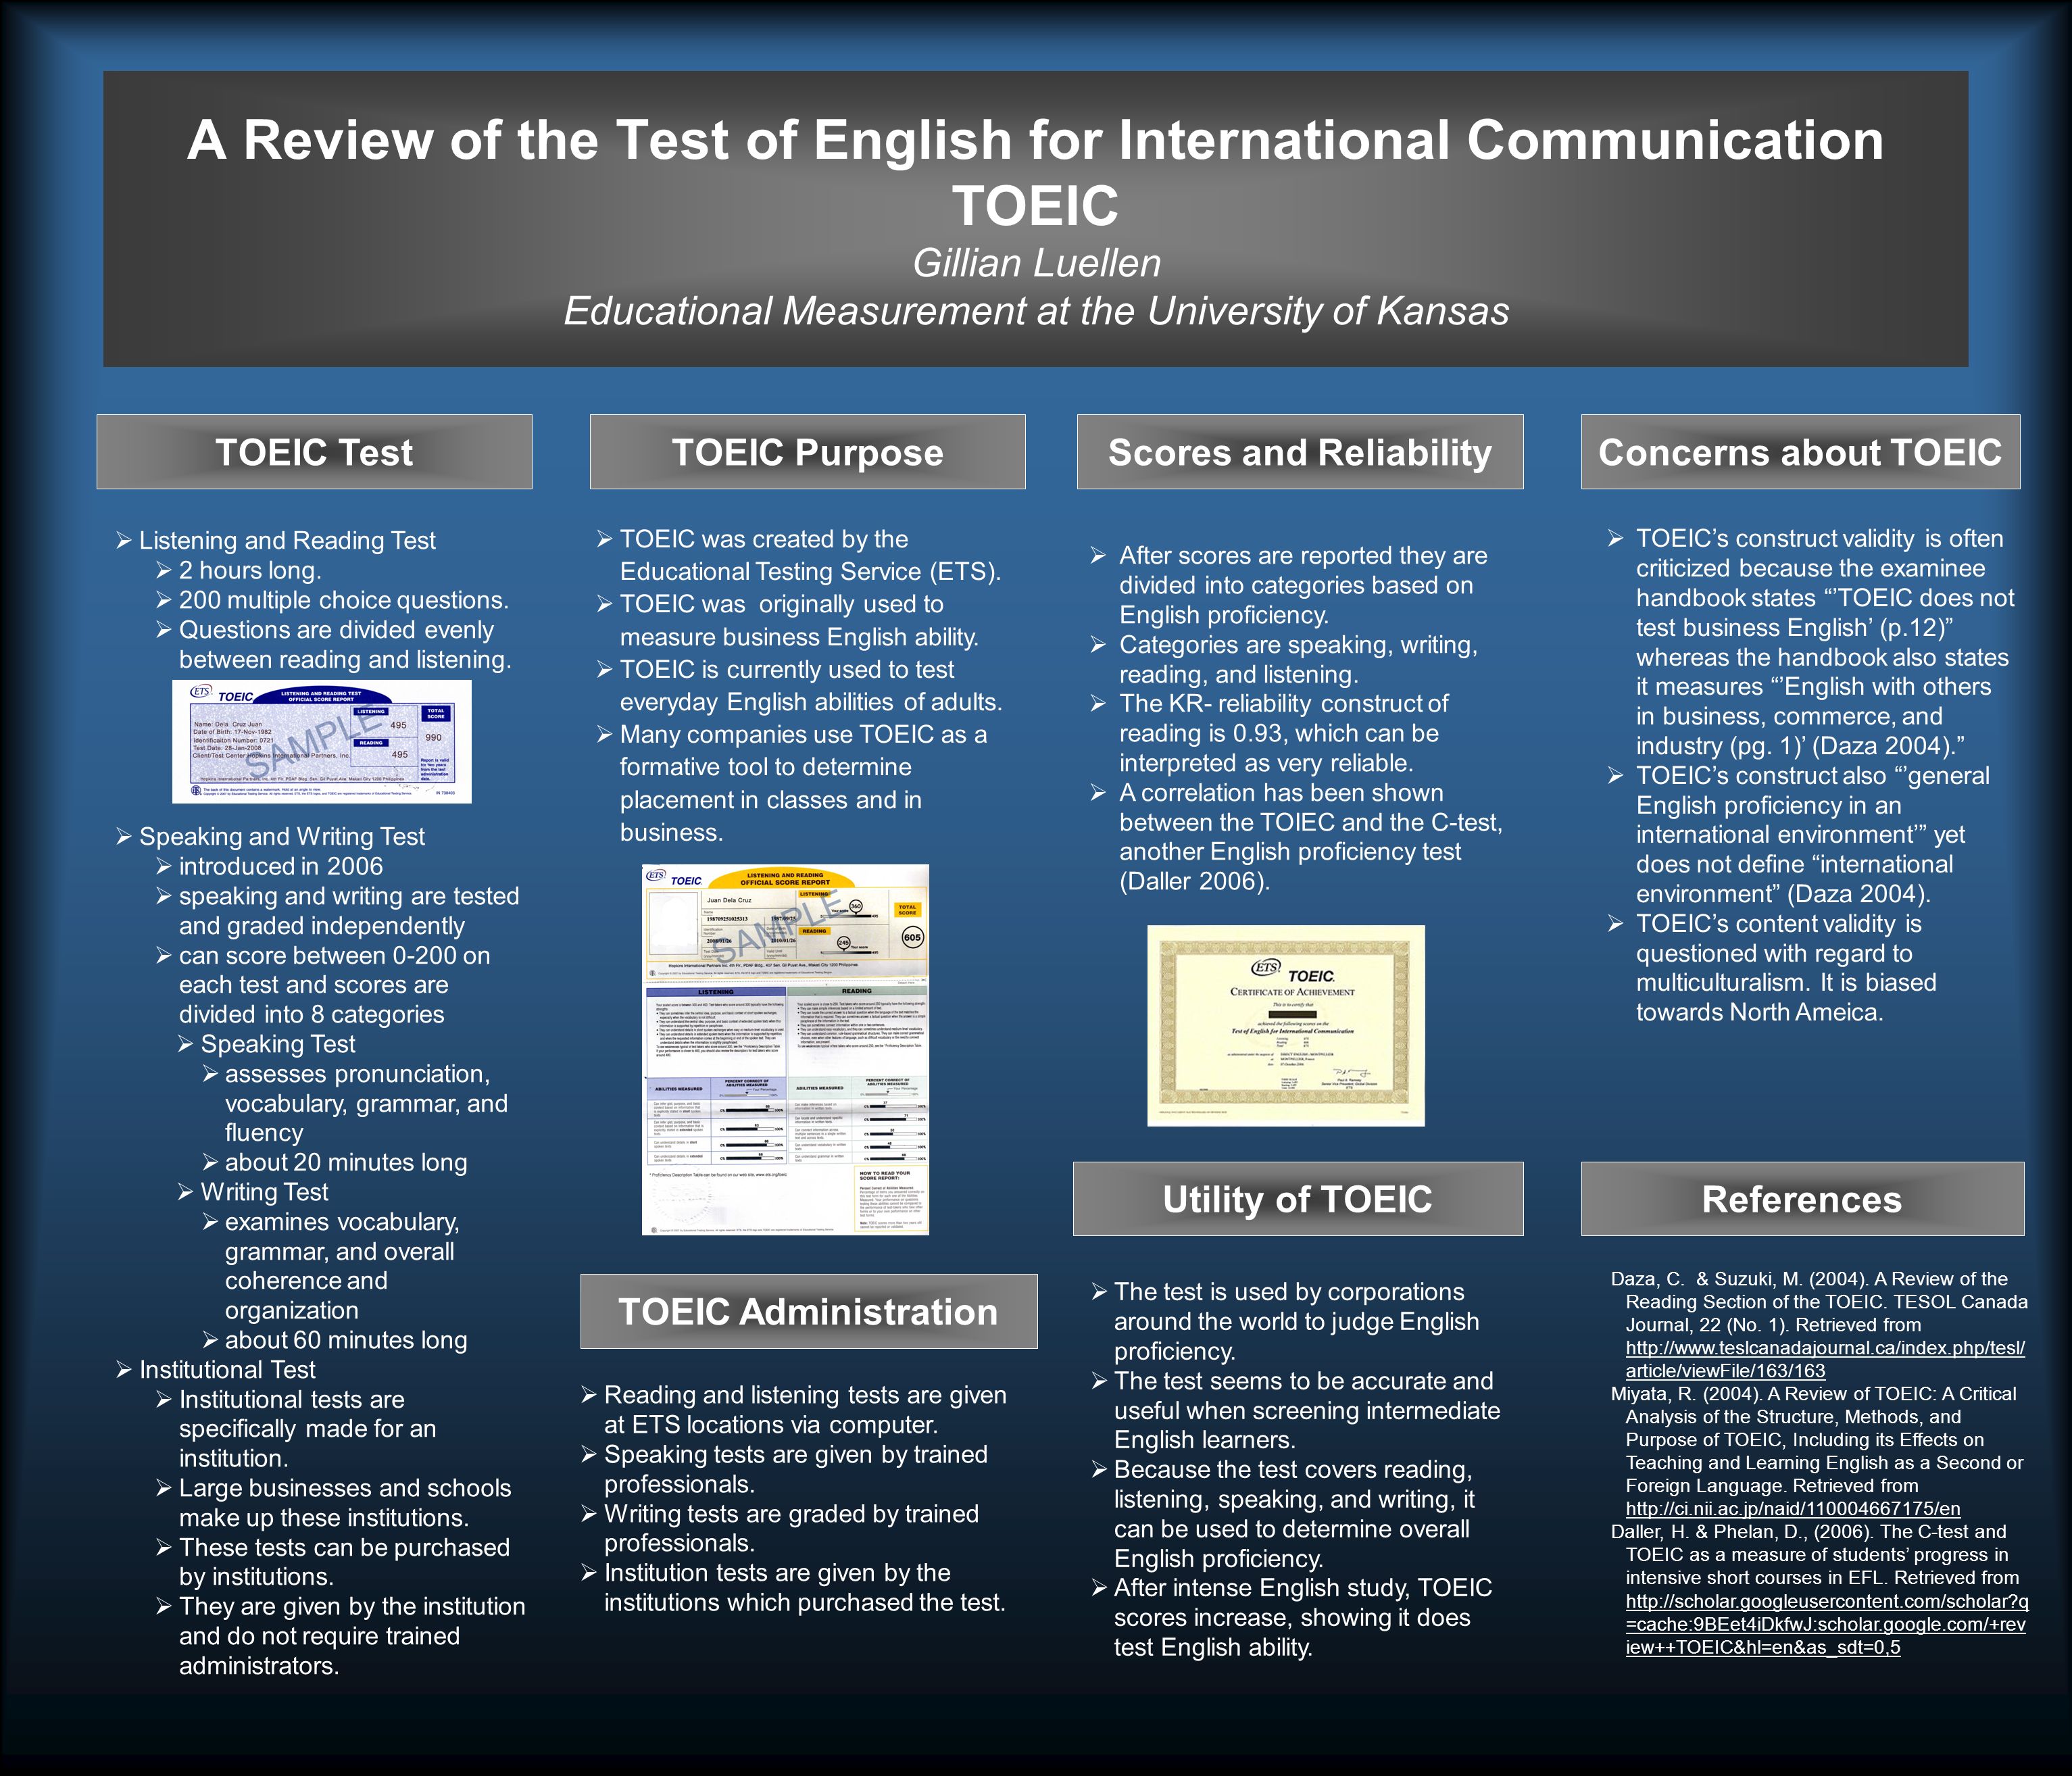 A Review of the Test of English for International Communication TOEIC Gillian Luellen Educational Measurement at the University of Kansas TOEIC Purpose TOEIC Administration Utility of TOEIC TOEIC TestScores and Reliability  TOEIC’s construct validity is often criticized because the examinee handbook states ’TOEIC does not test business English’ (p.12) whereas the handbook also states it measures ’English with others in business, commerce, and industry (pg.